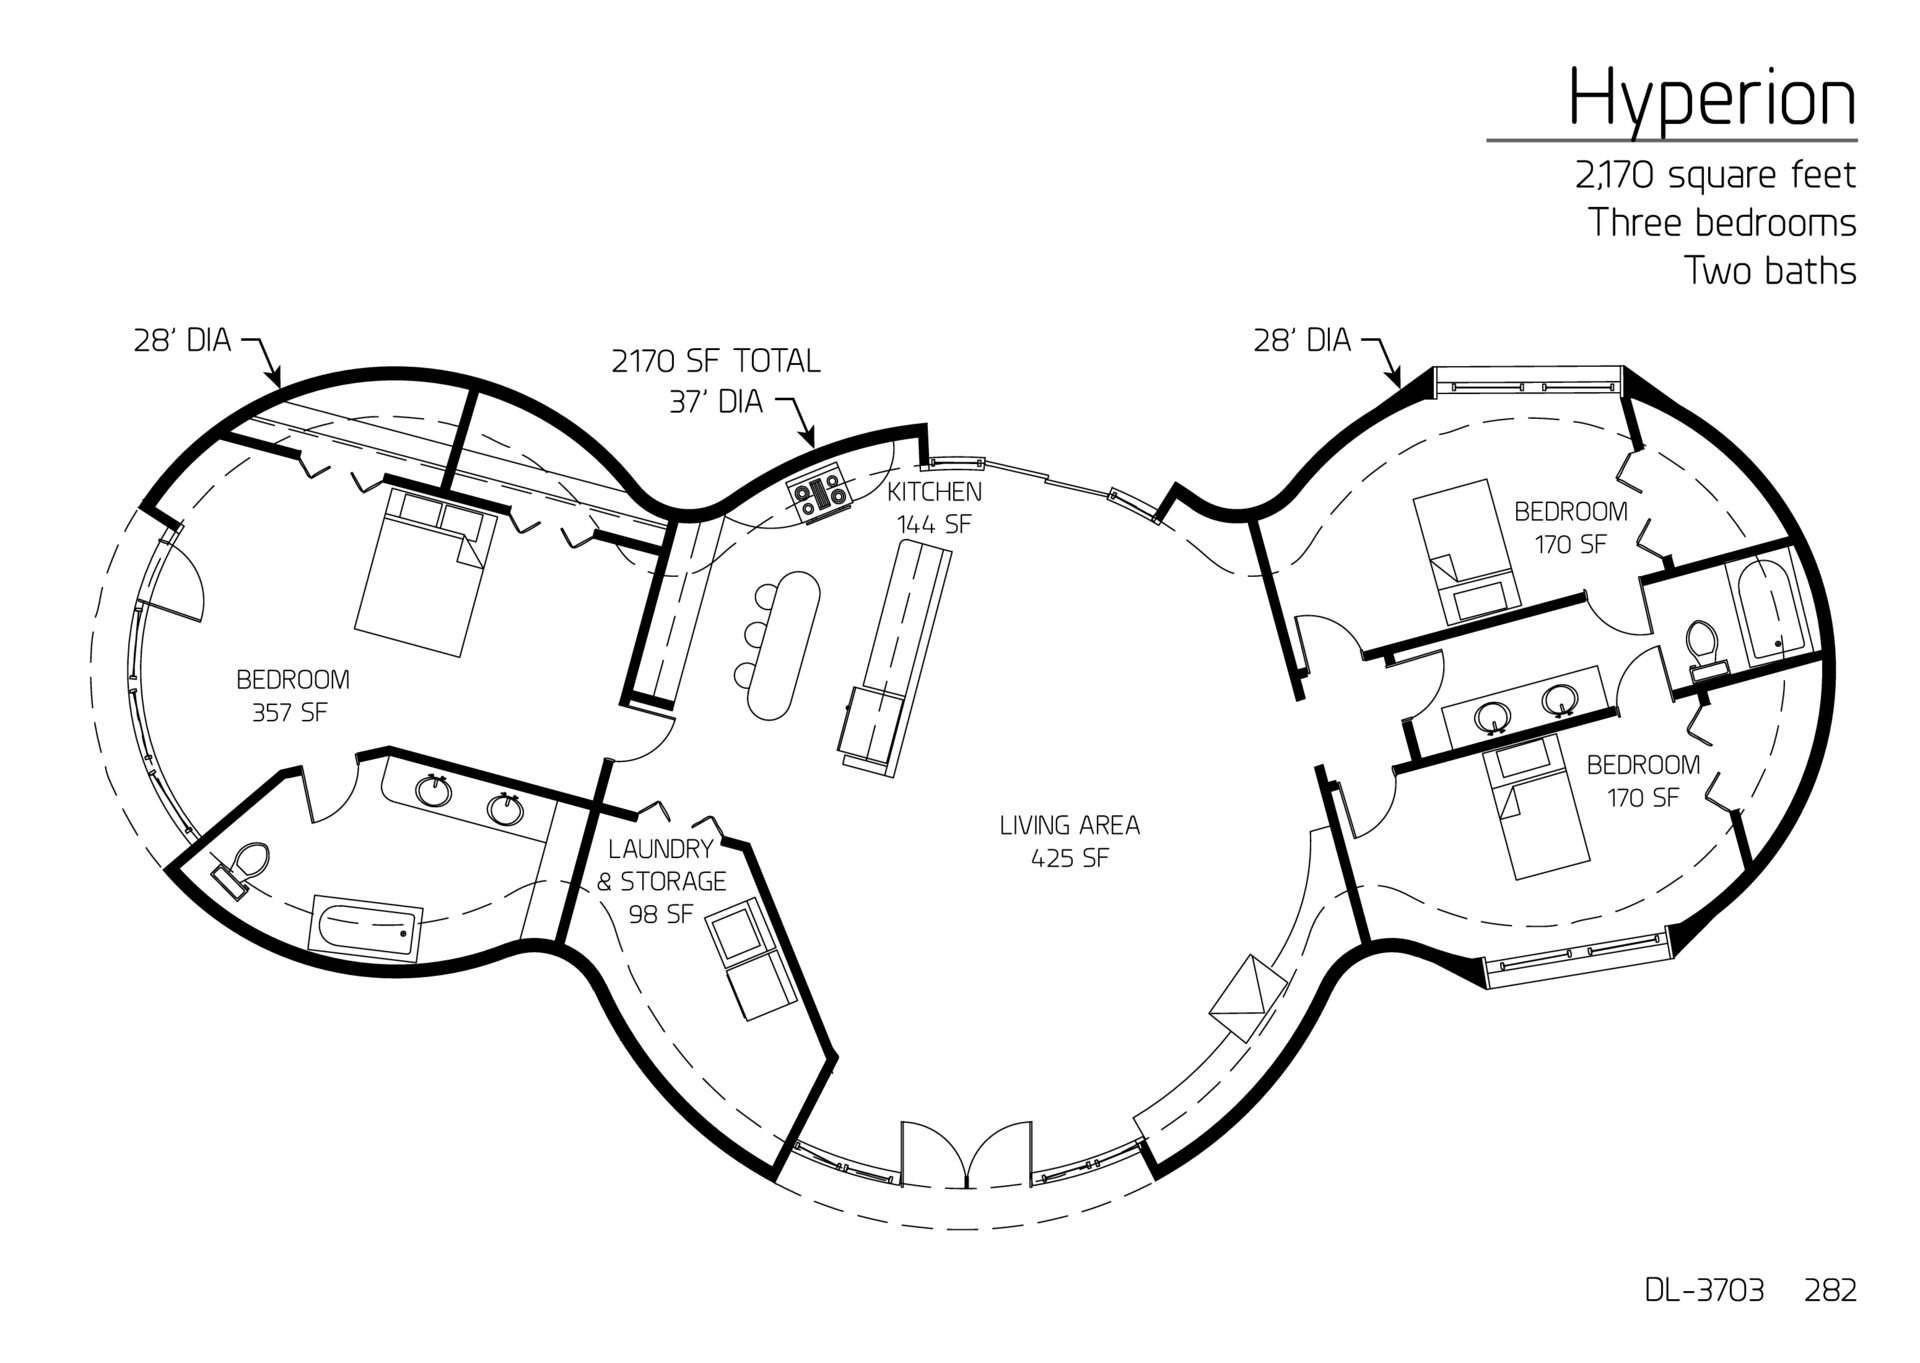 Hyperion: 28', 37' and 28' Diameter Domes, 2,170 SF, Three-Bedrooms, Two Baths Floor Plan.